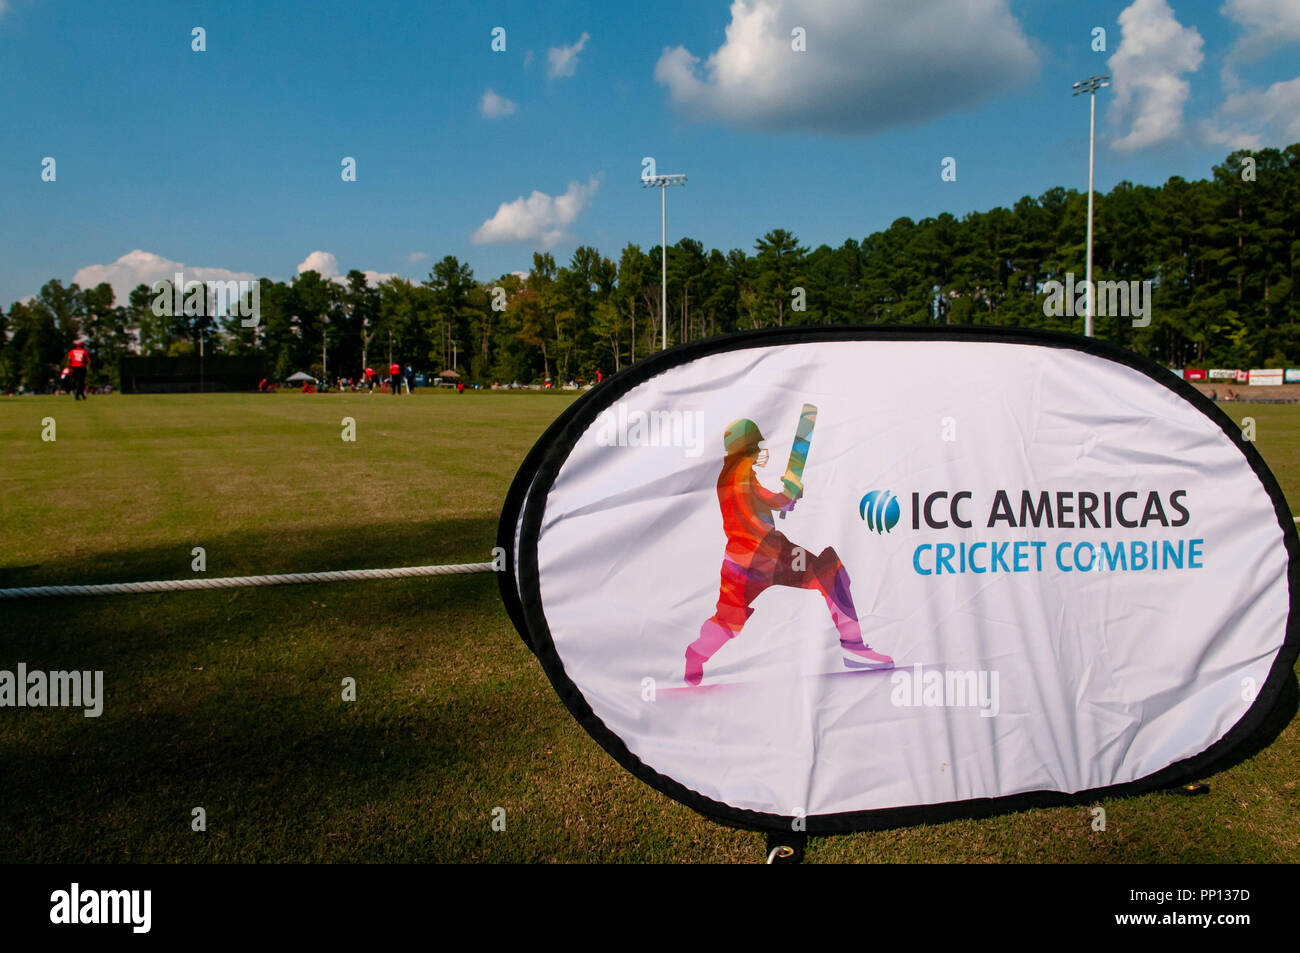 Morrisville, North Carolina, USA. 22nd Sep, 2018. Sept. 22, 2018 - Morrisville N.C., USA - Cricket action on the pitch during the ICC World T20 America's ''A'' Qualifier cricket match between USA and Canada. Both teams played to a 140/8 tie with Canada winning the Super Over for the overall win. In addition to USA and Canada, the ICC World T20 America's ''A'' Qualifier also features Belize and Panama in the six-day tournament that ends Sept. 26. Credit: Timothy L. Hale/ZUMA Wire/Alamy Live News Stock Photo